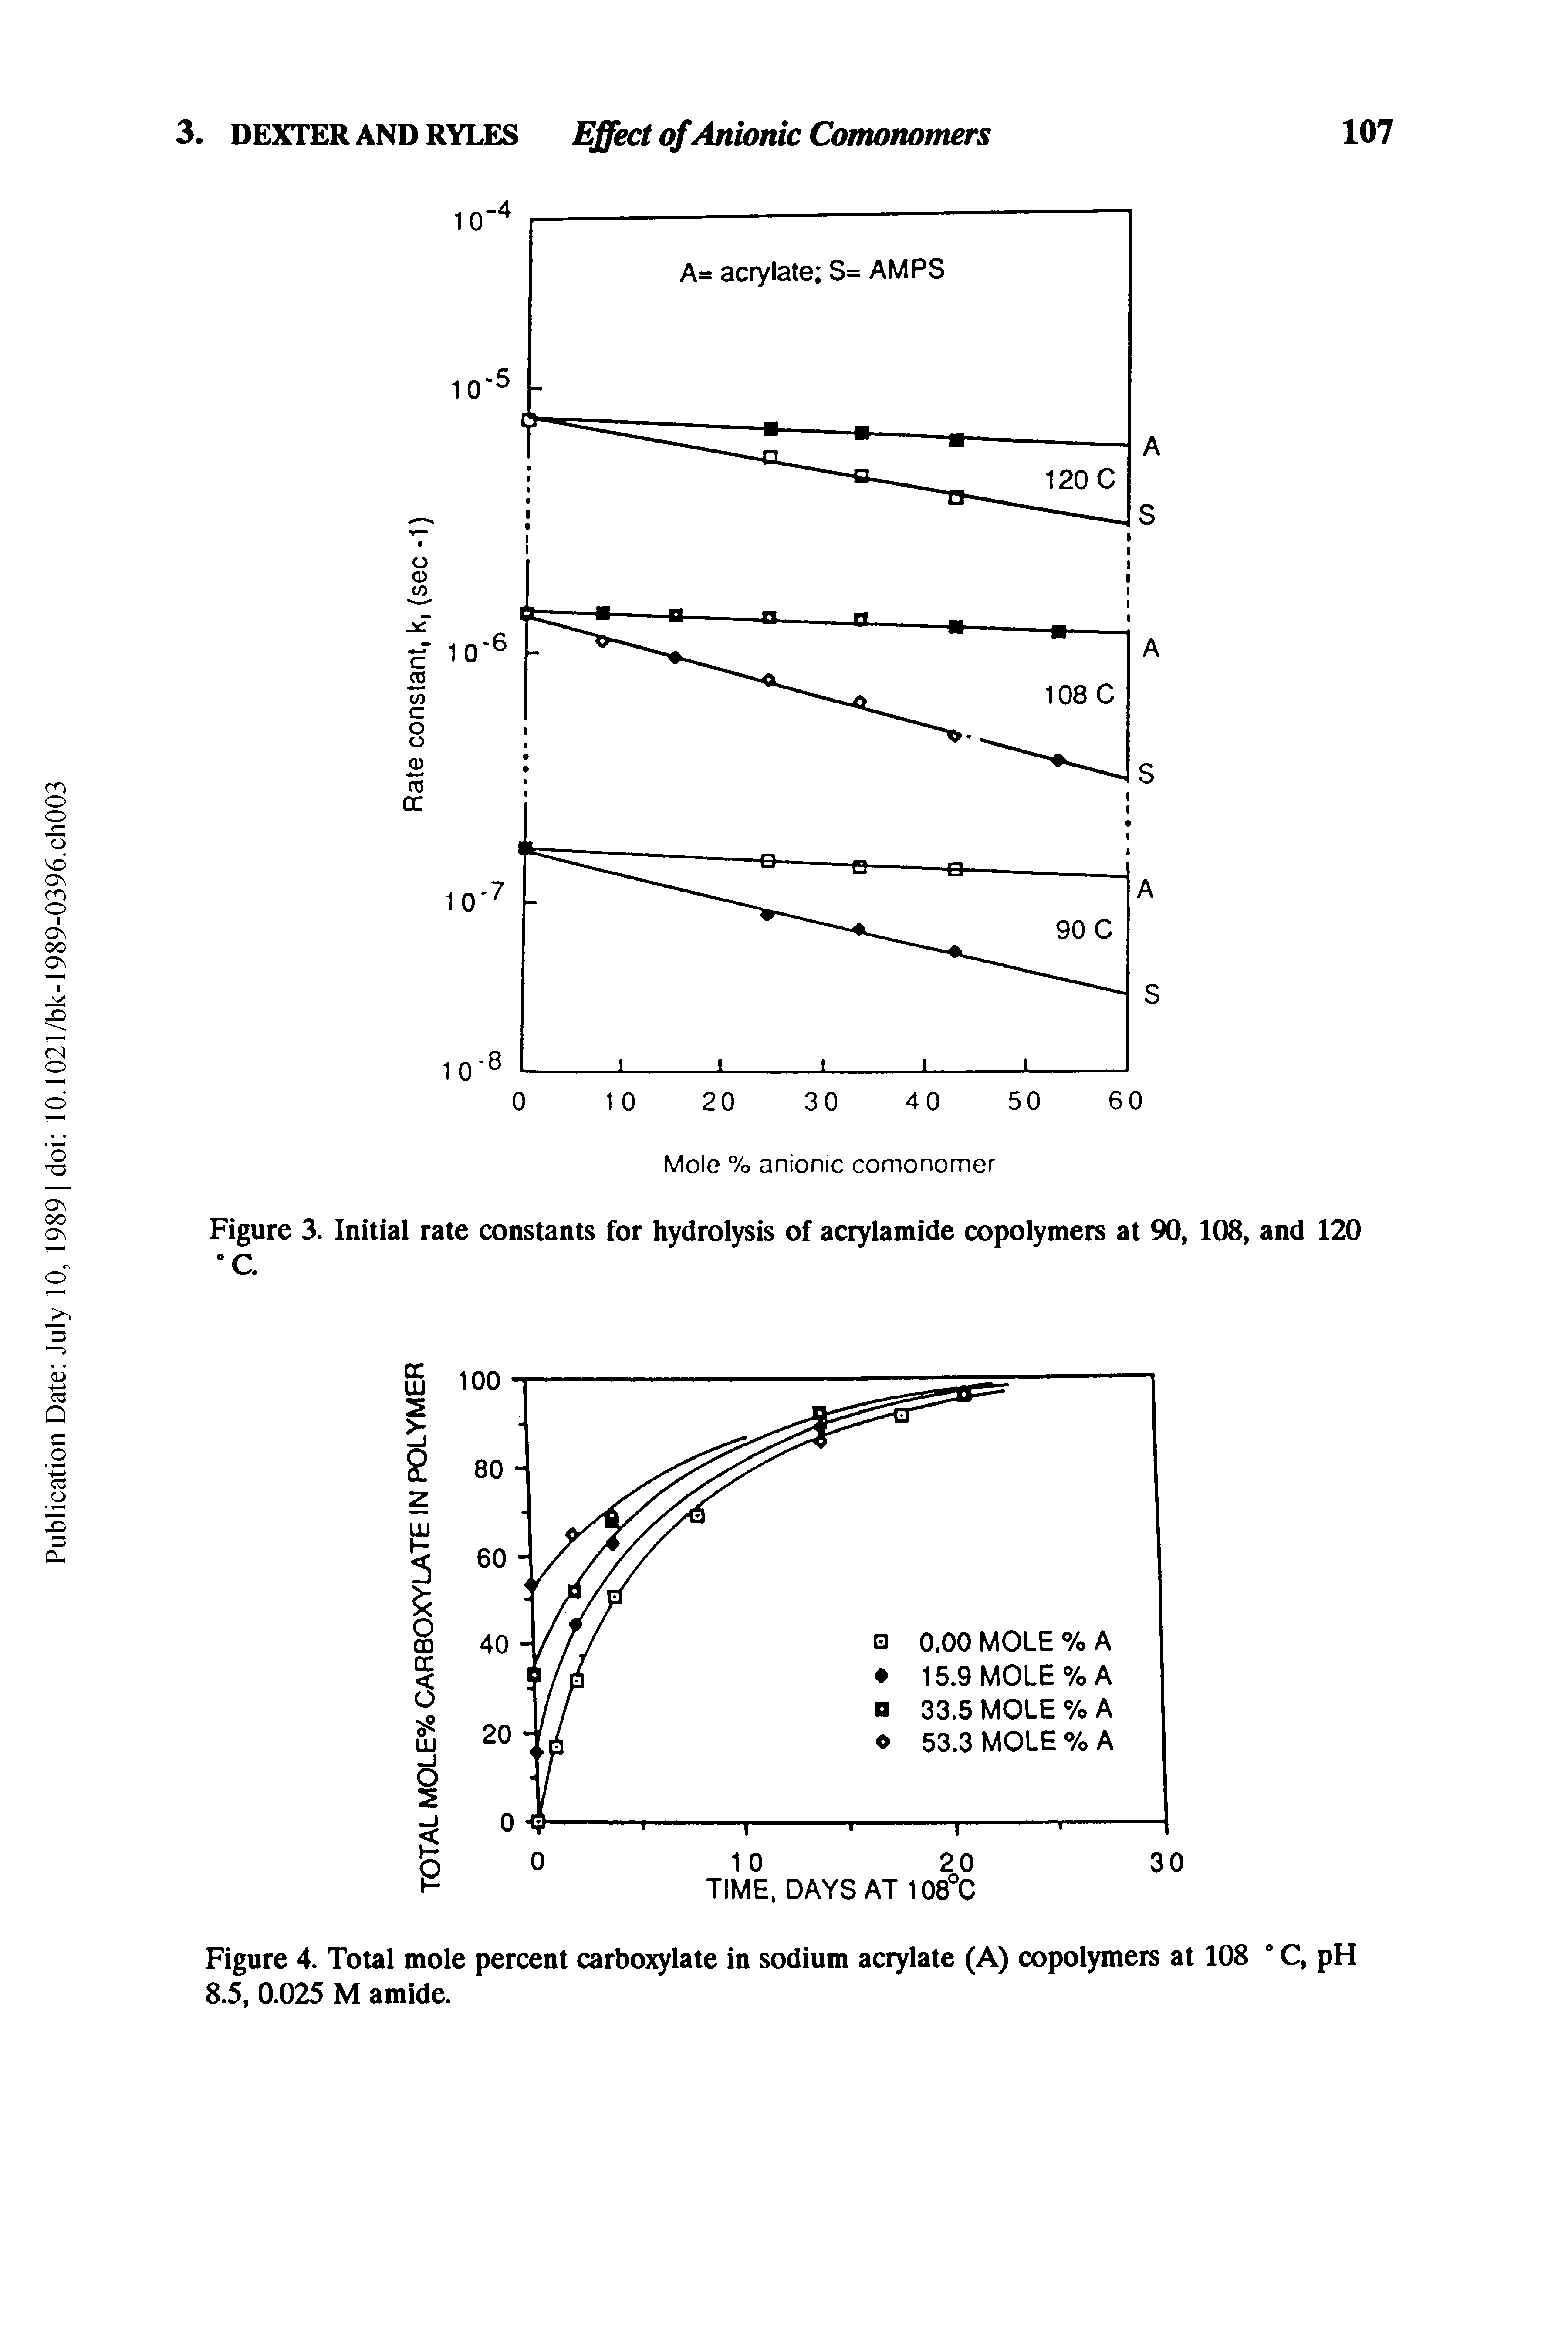 Figure 3. Initial rate constants for hydrolysis of acrylamide copolymers at 90, 108, and 120 °C.